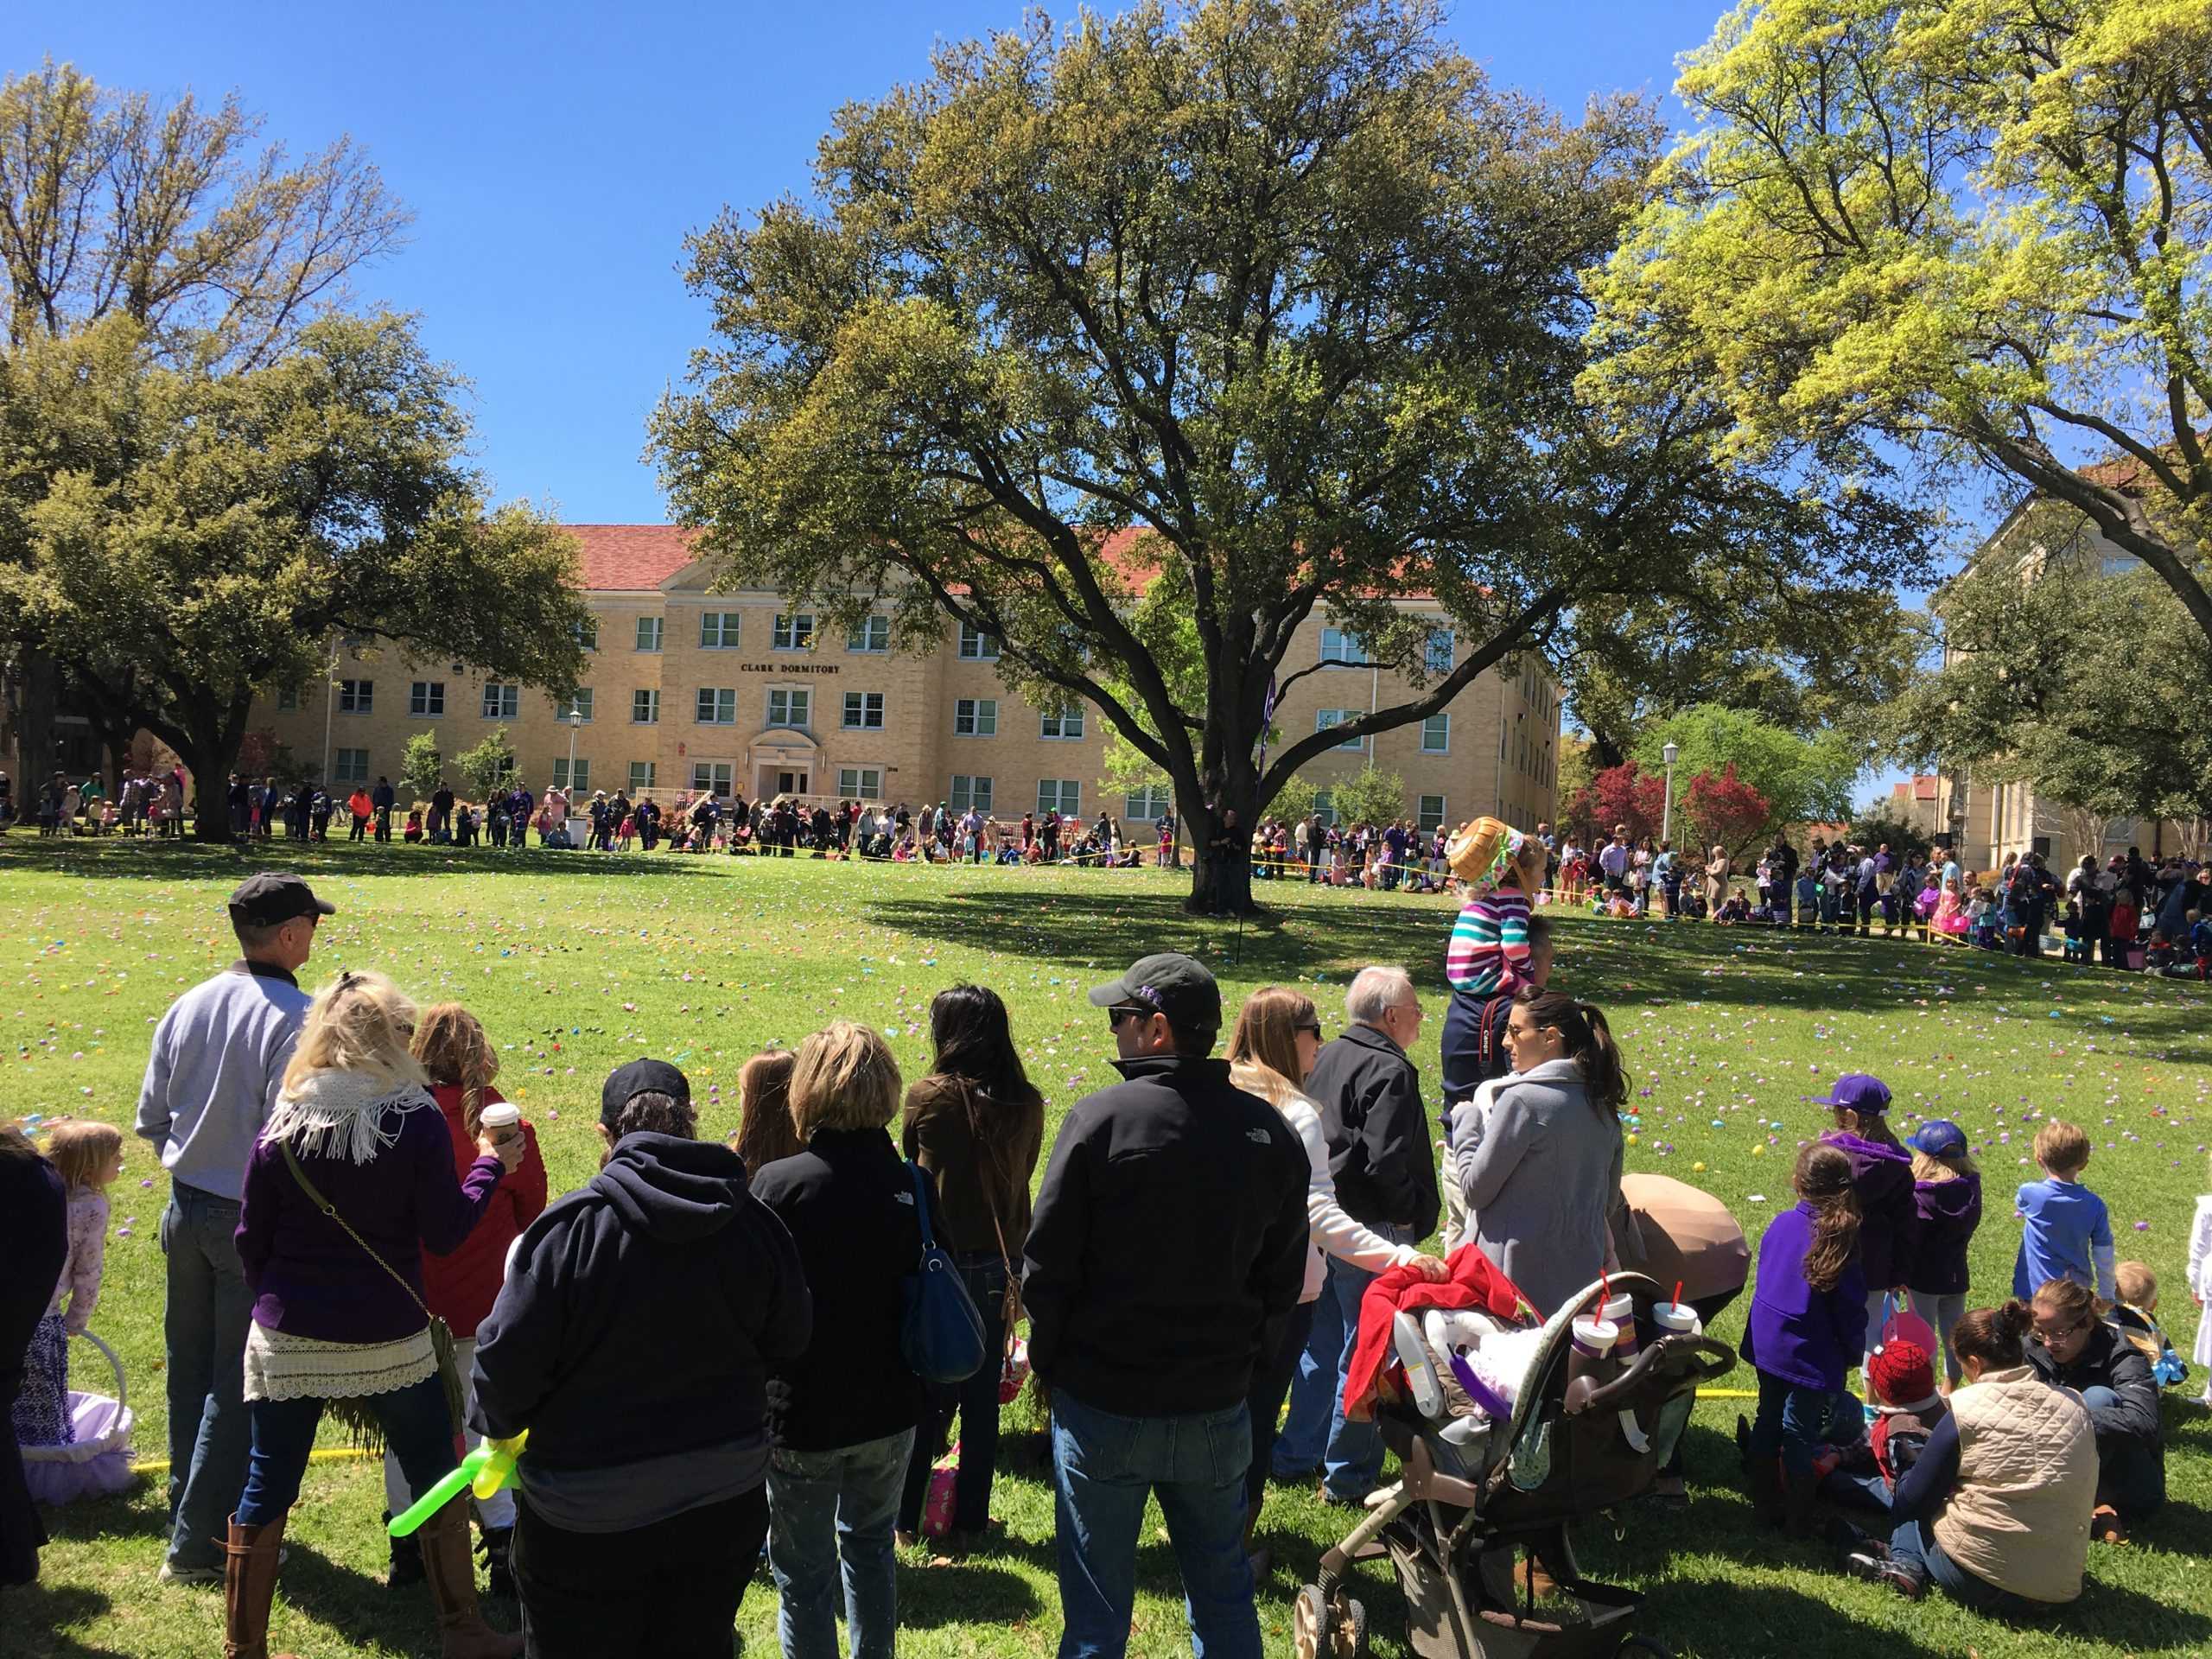 TCU+Alumni+and+their+families+gather+outside+of+Sadler+Hall+Sunday+afternoon+for+the+22nd+annual+Easter+Egg+Hunt+and+family+picnic.+